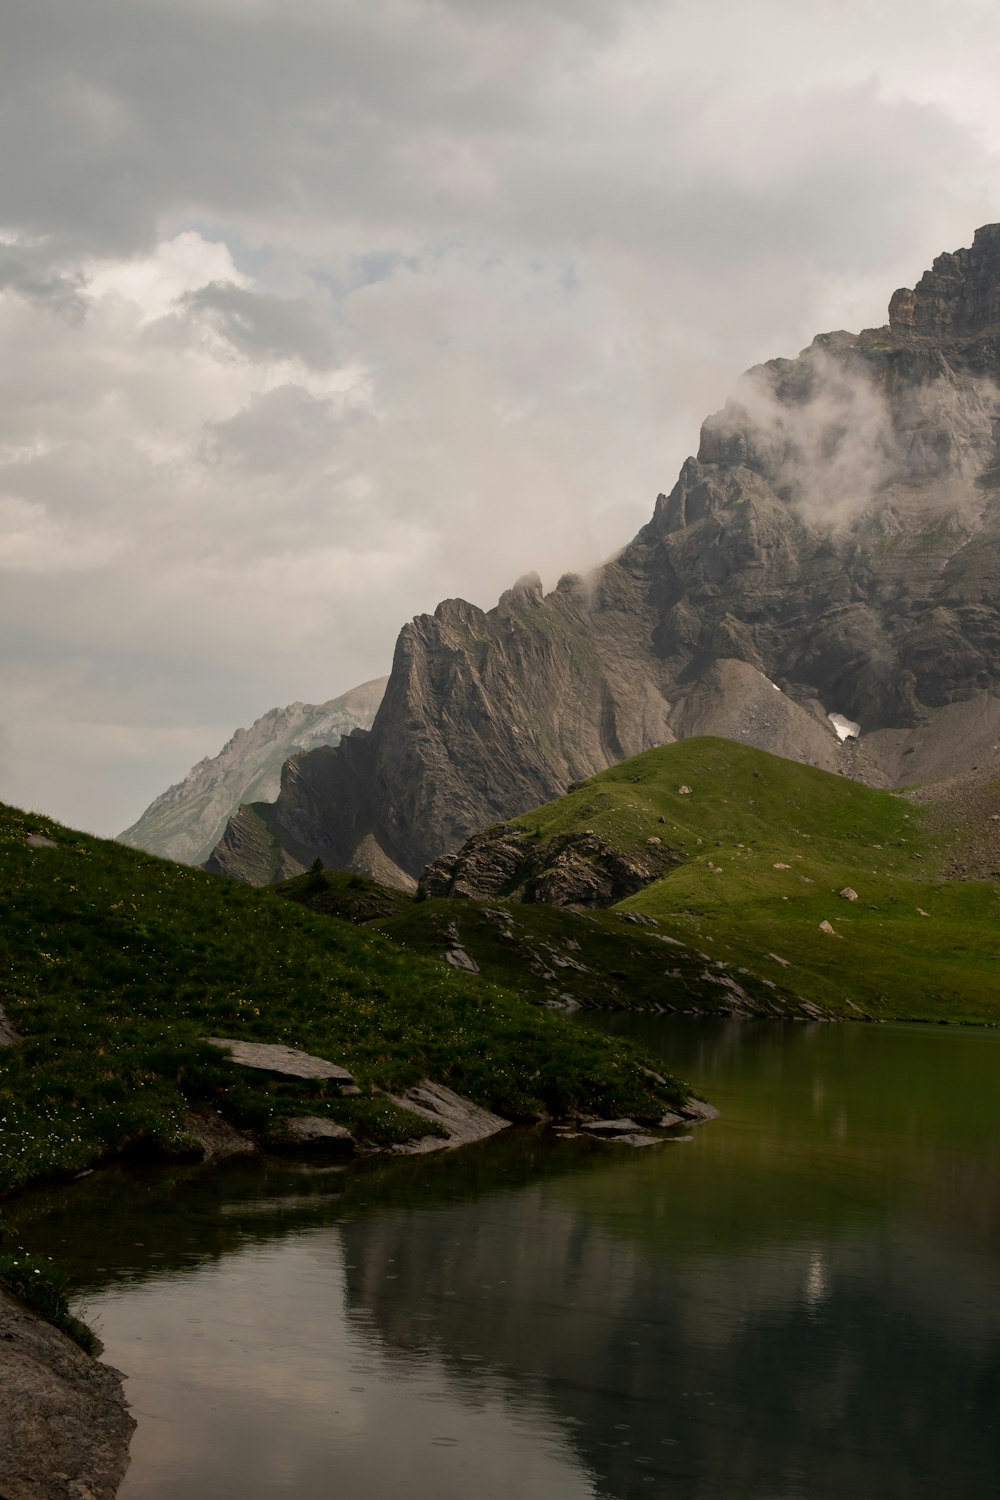 green and gray mountain beside lake under cloudy sky during daytime